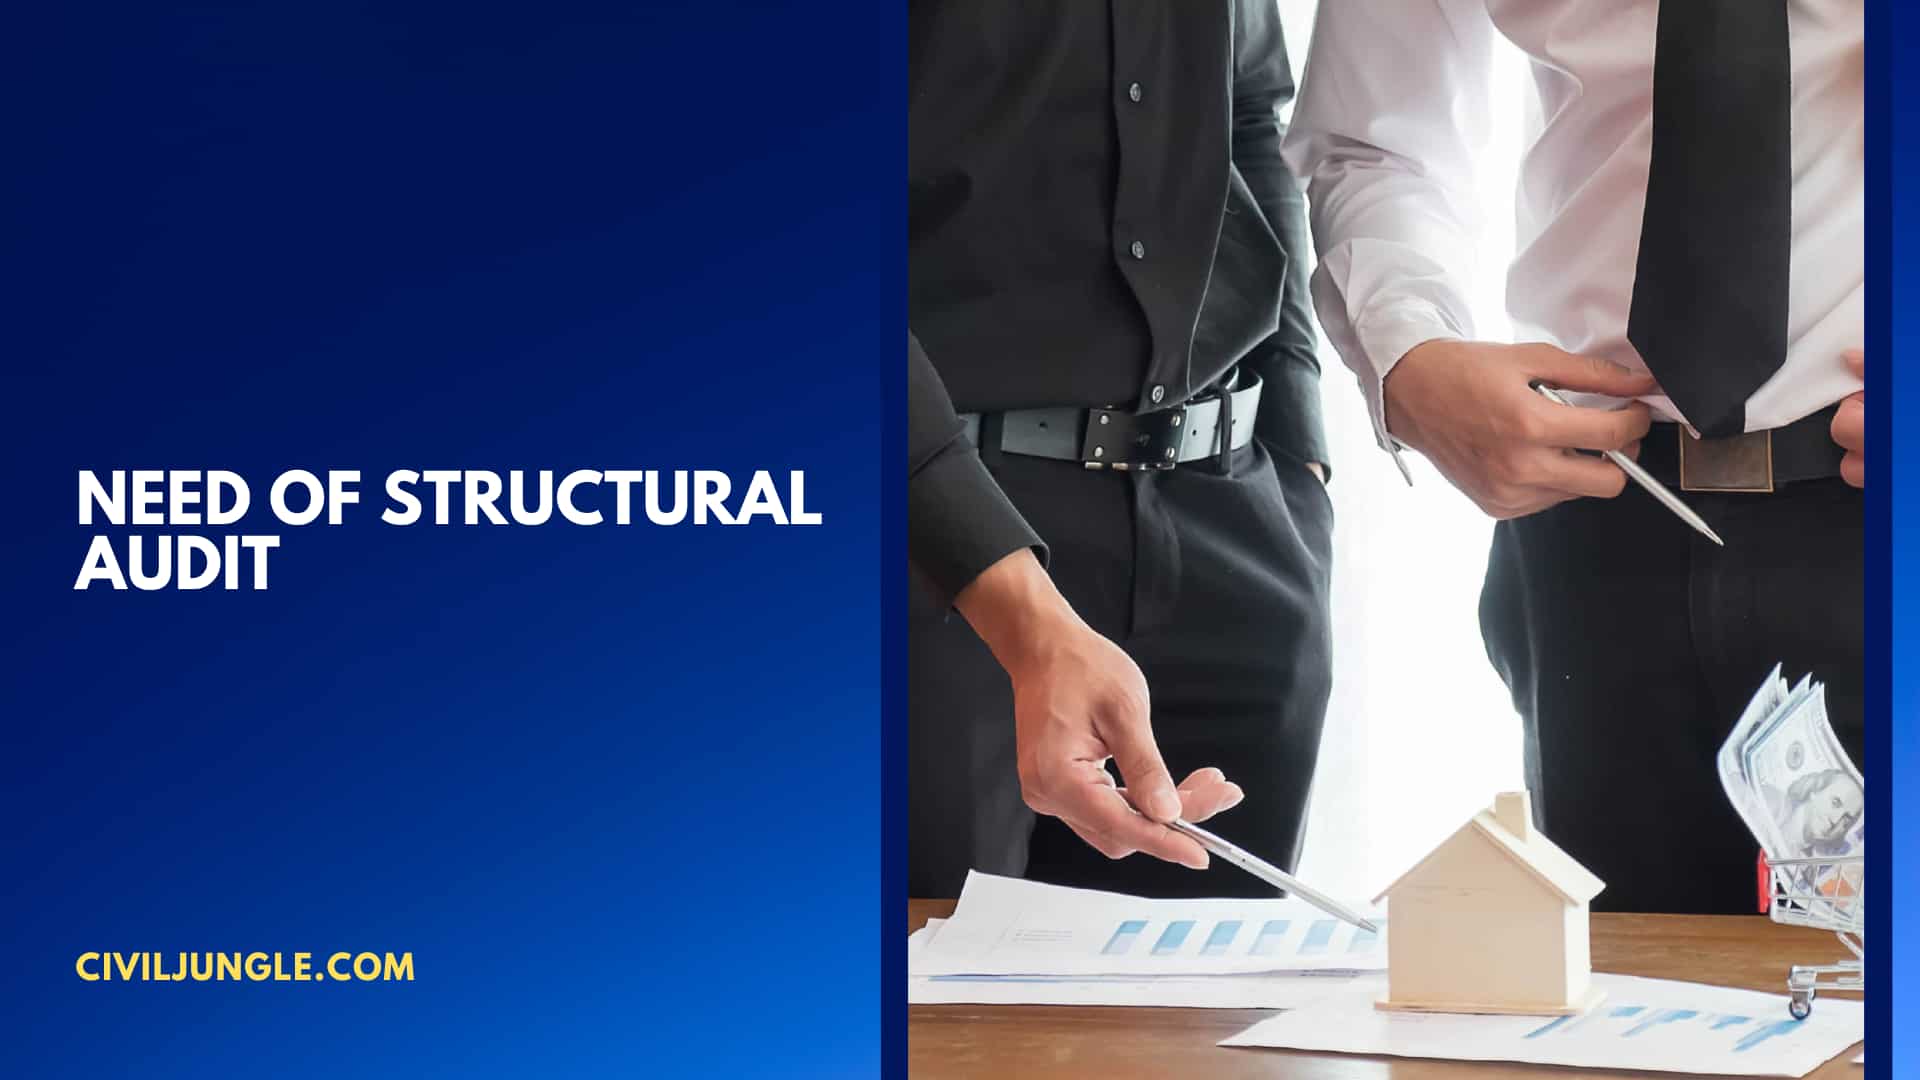 Need of Structural Audit